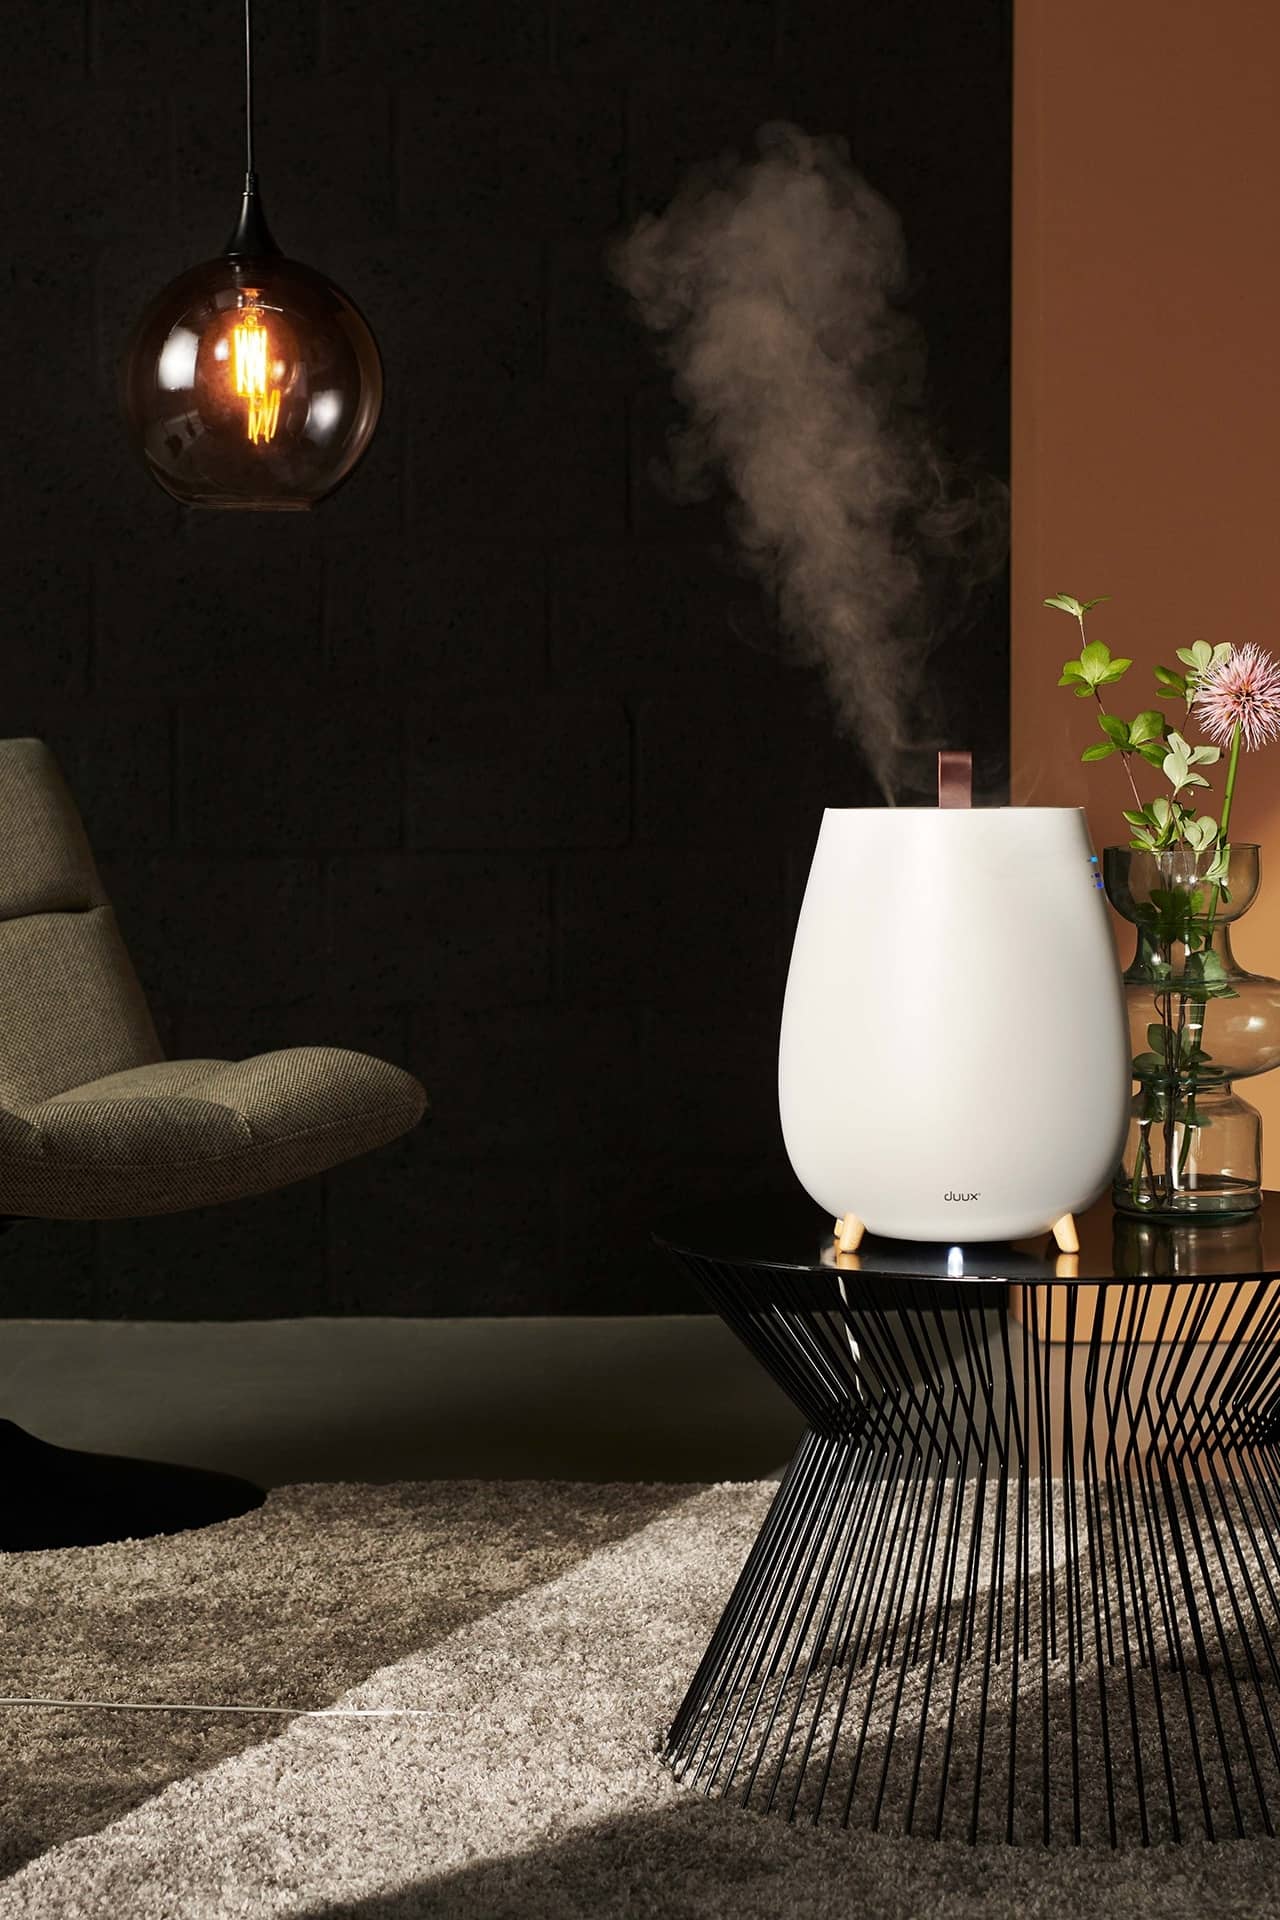 Duux humidifier in living room